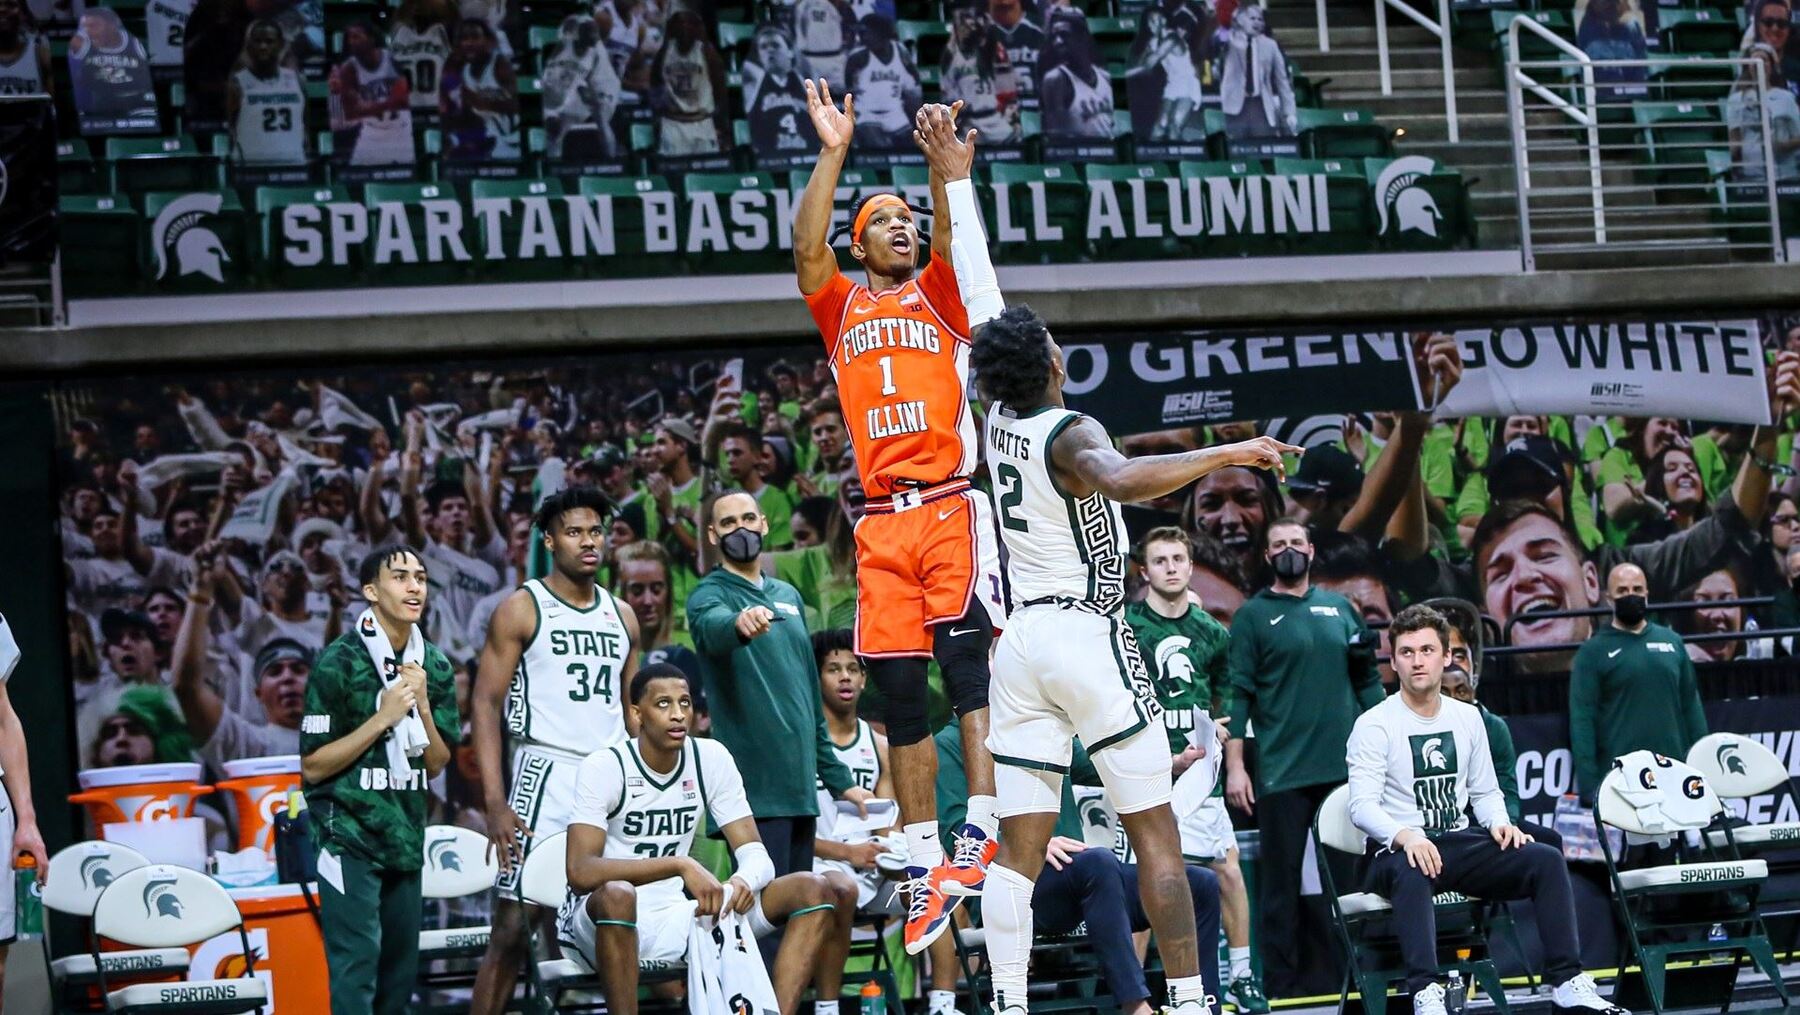 Trent Frazier takes a jump shot over Michigan State defenders